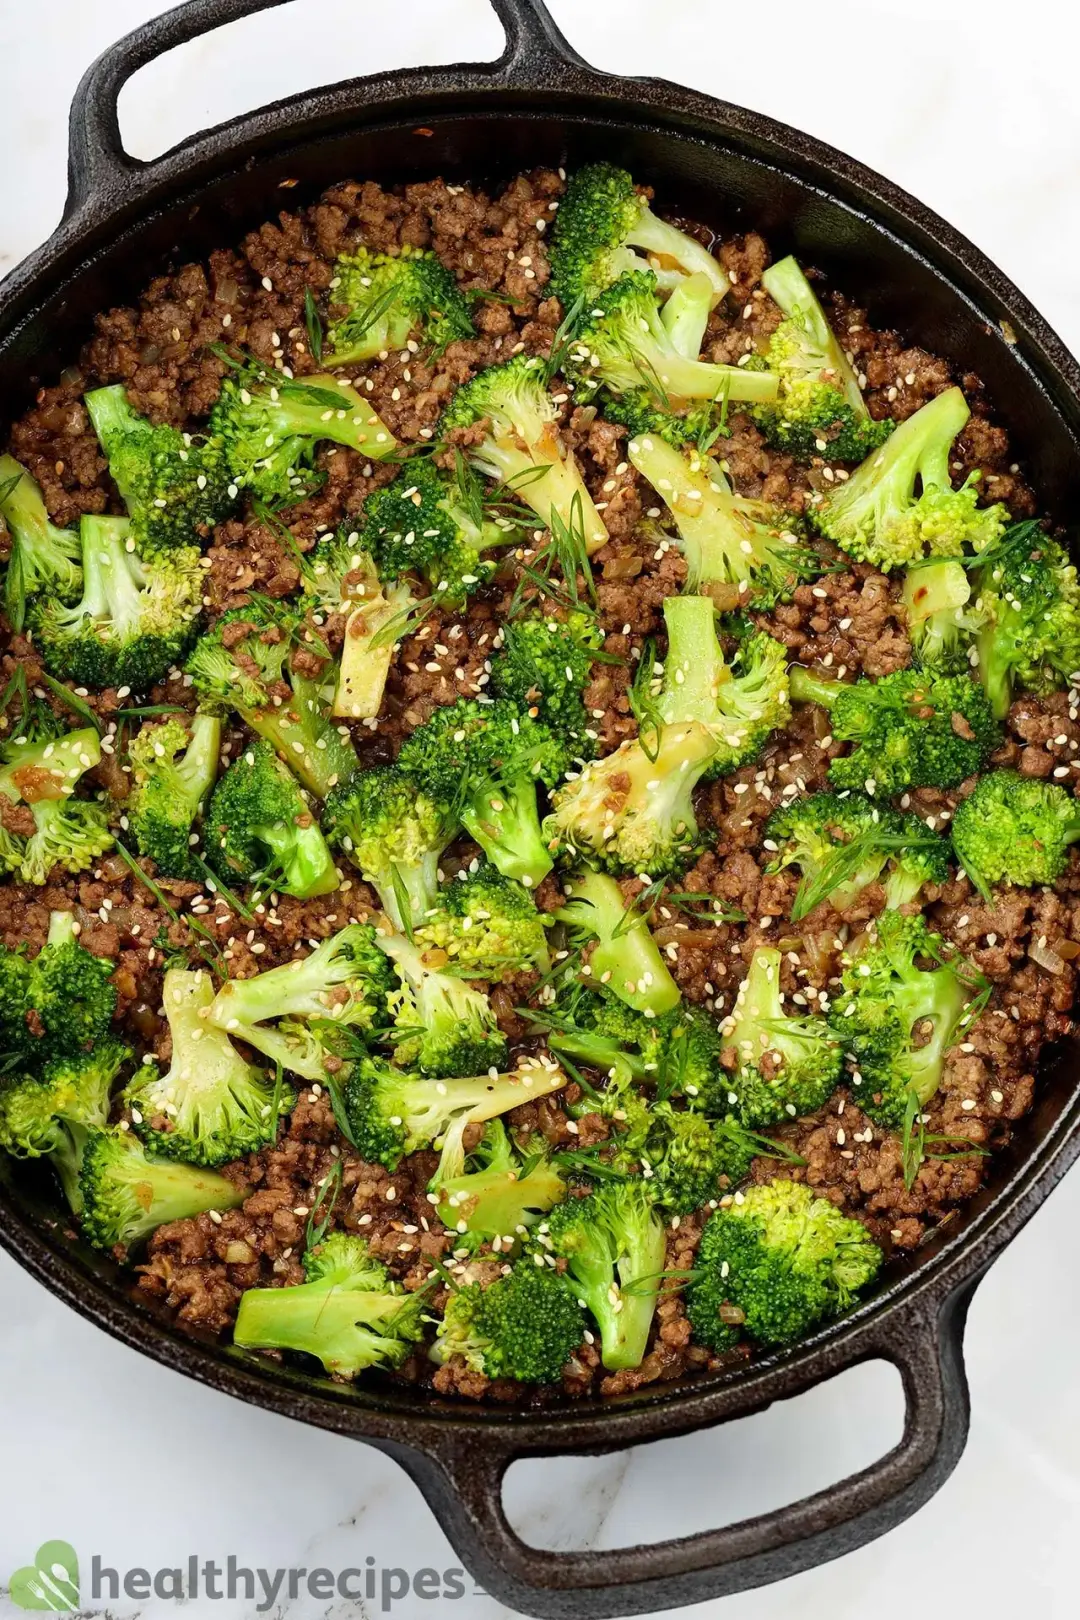 Tips for Ground Beef and Broccoli